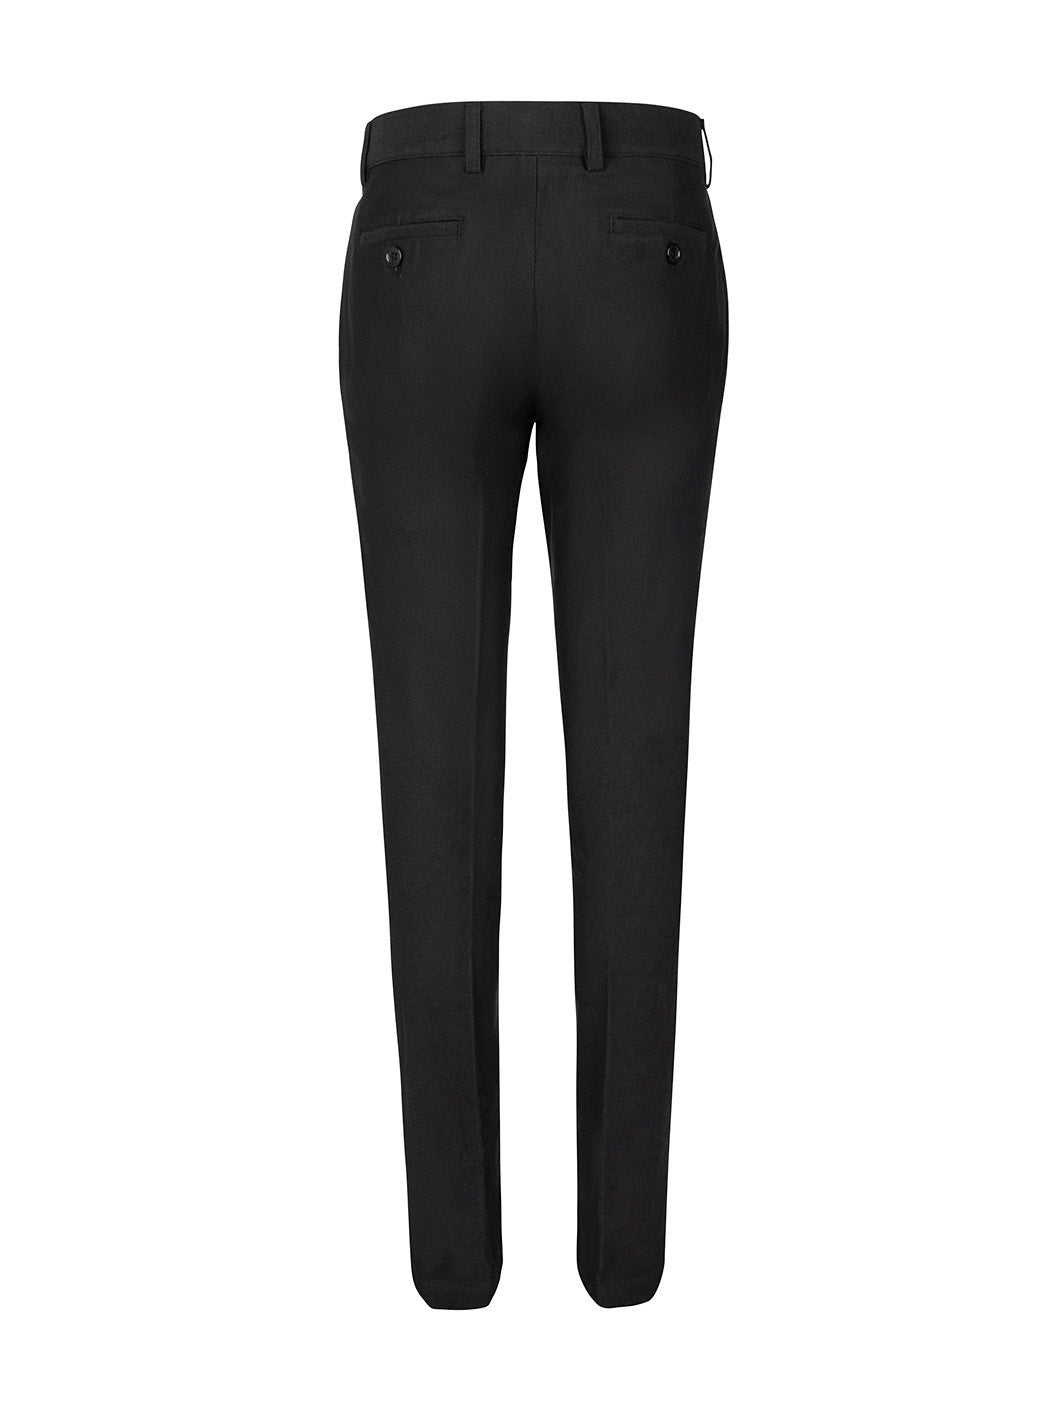 Black Casual Five Pocket Style Stretch Pants